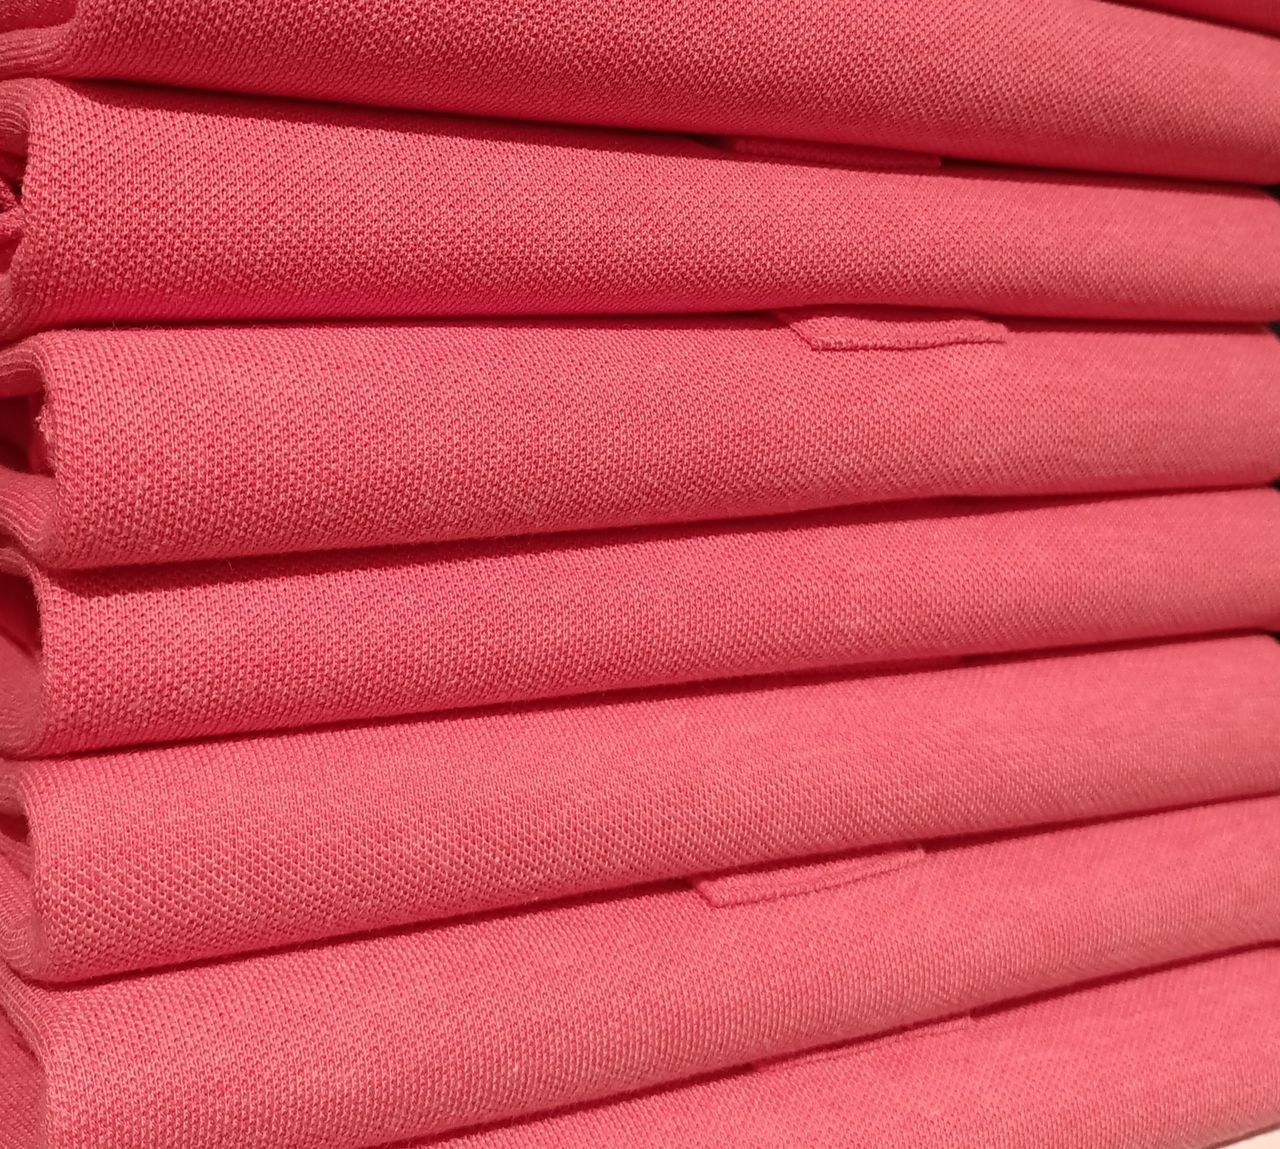 FULL FRAME SHOT OF PINK STACK OF BLUE FABRIC